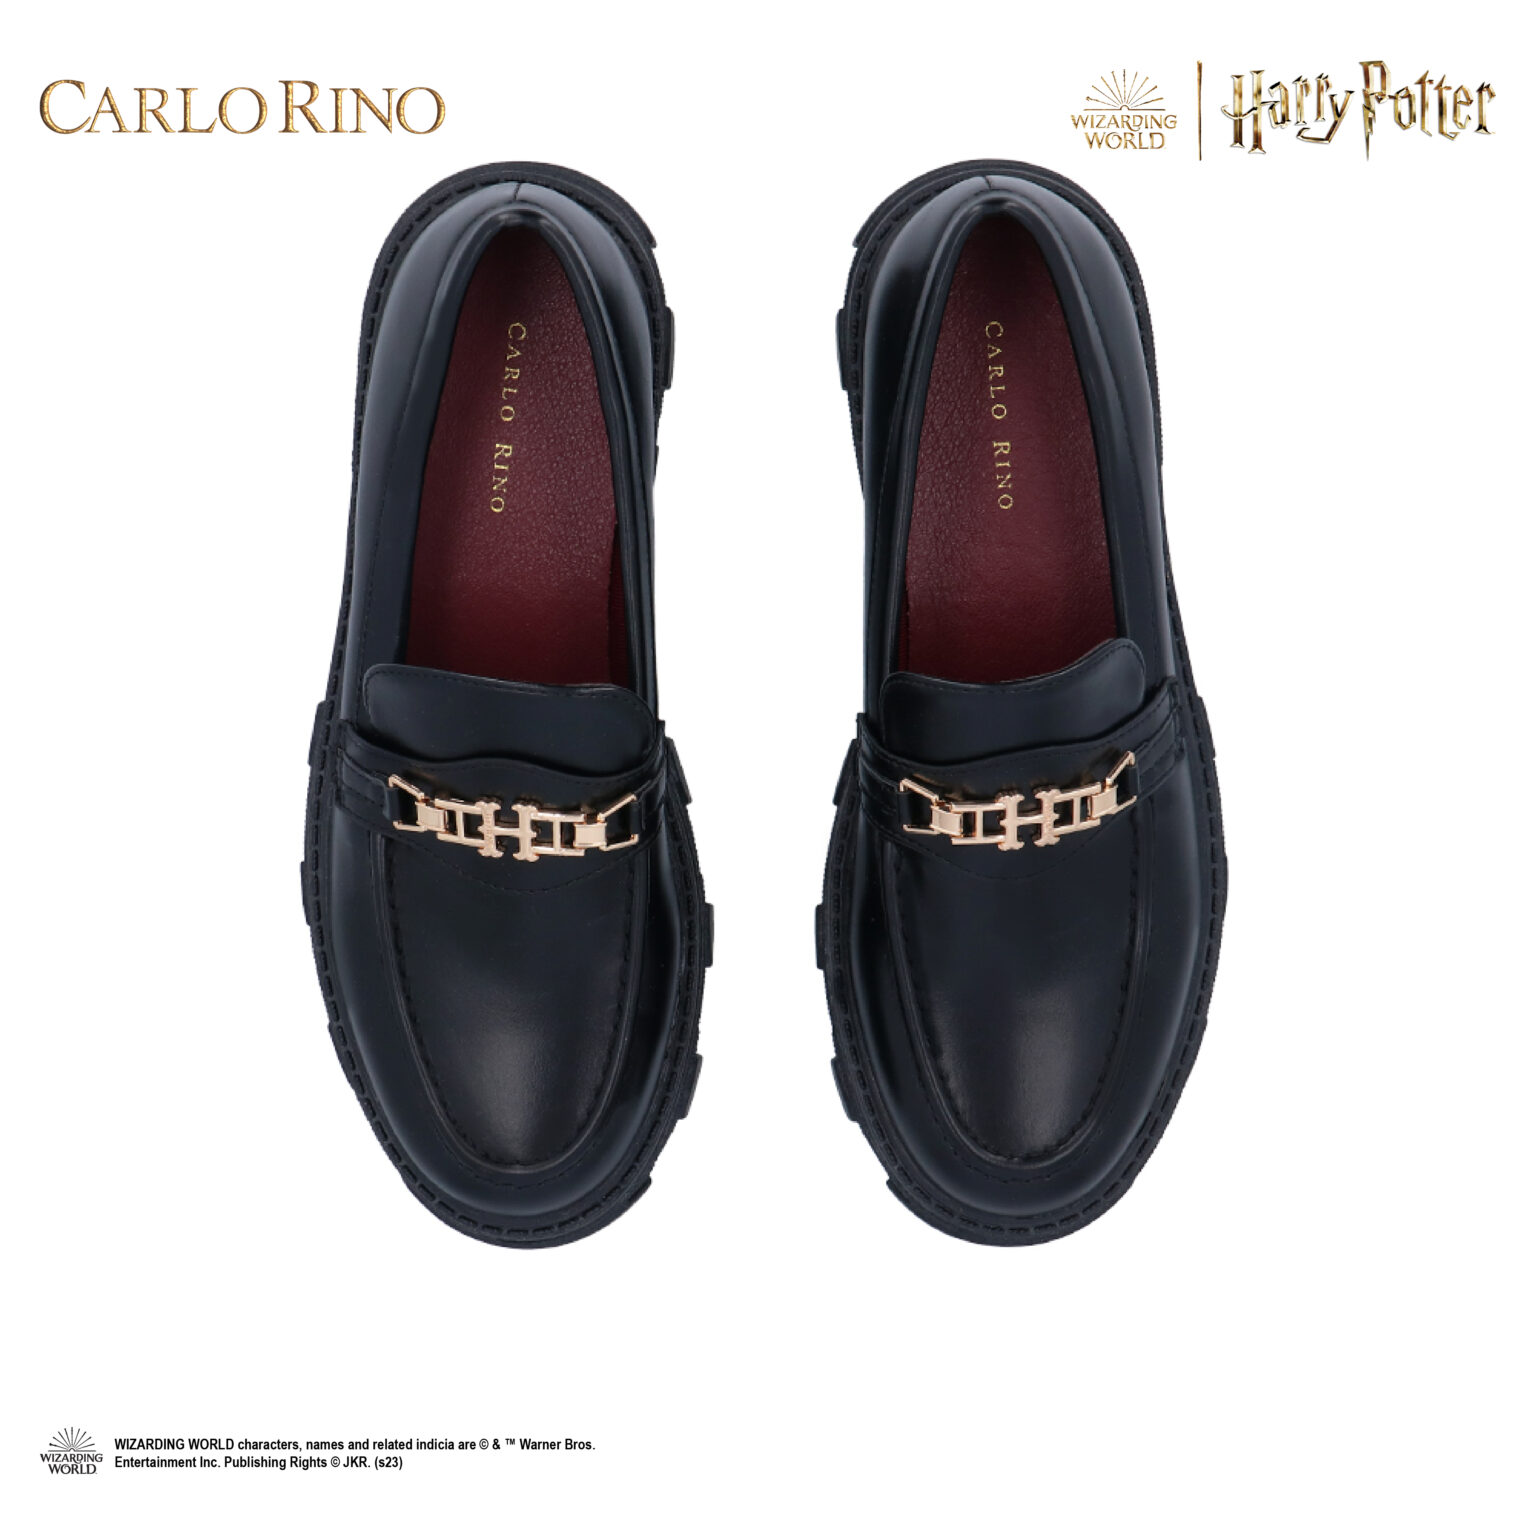 Harry Potter Loafer - Carlo Rino Online Shopping